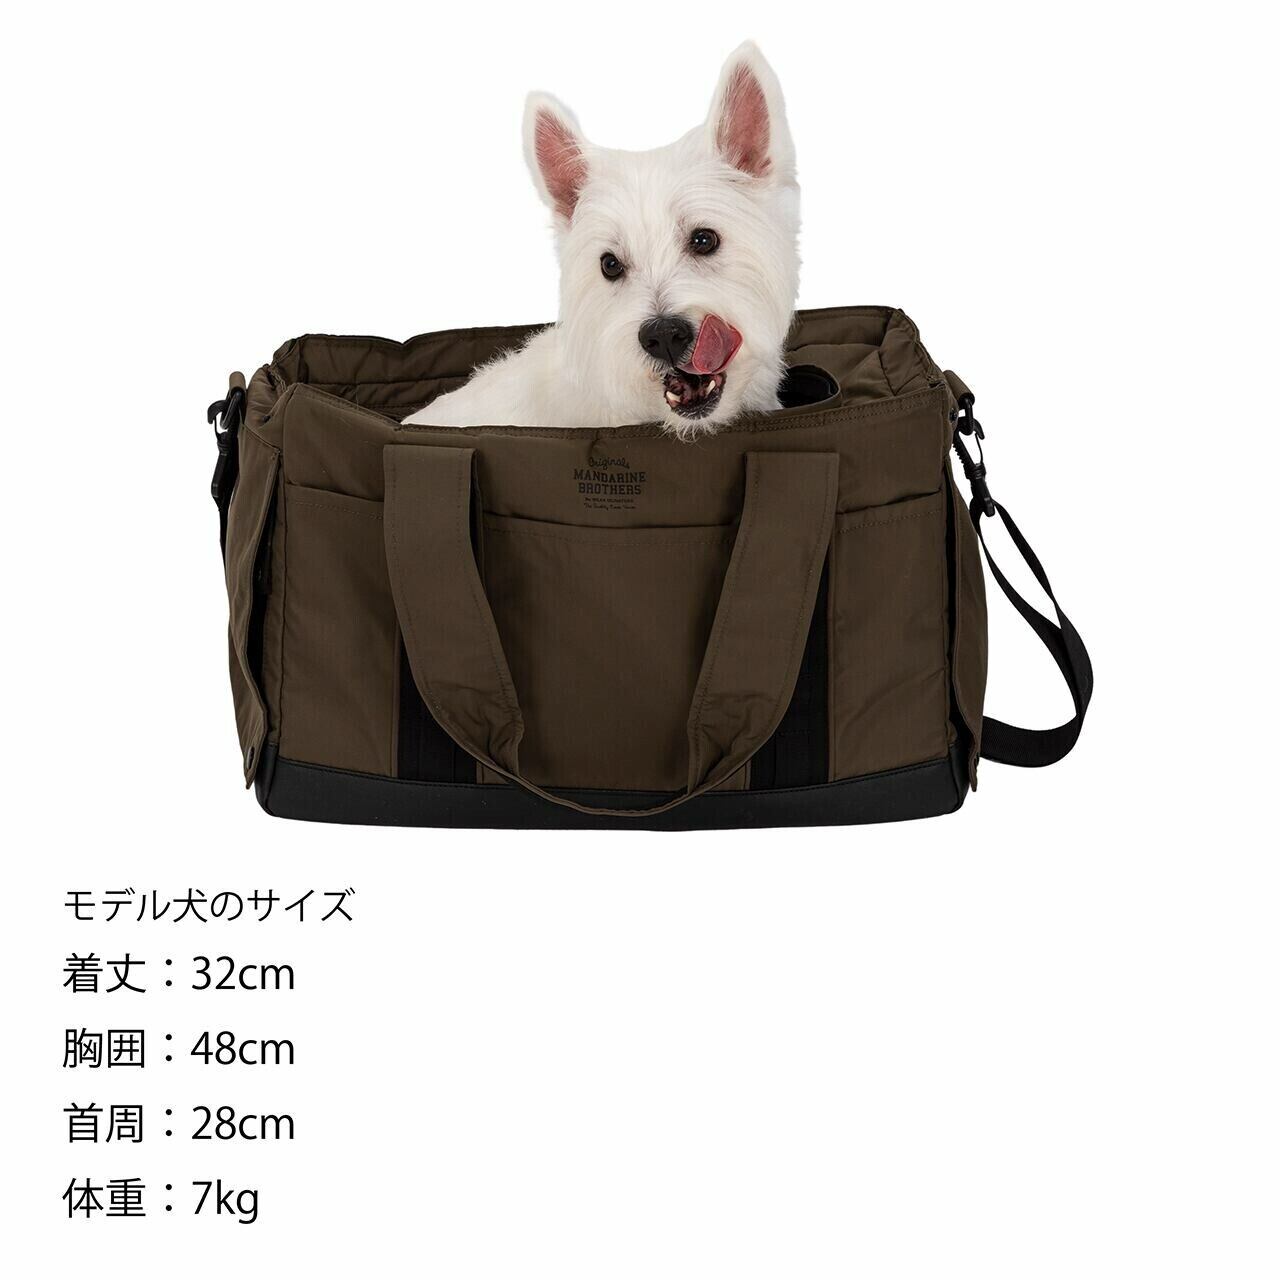 GLASGOW CARRY TOTE BAG / グラスゴーキャリートートバッグ　MANDARINE BROTHERS